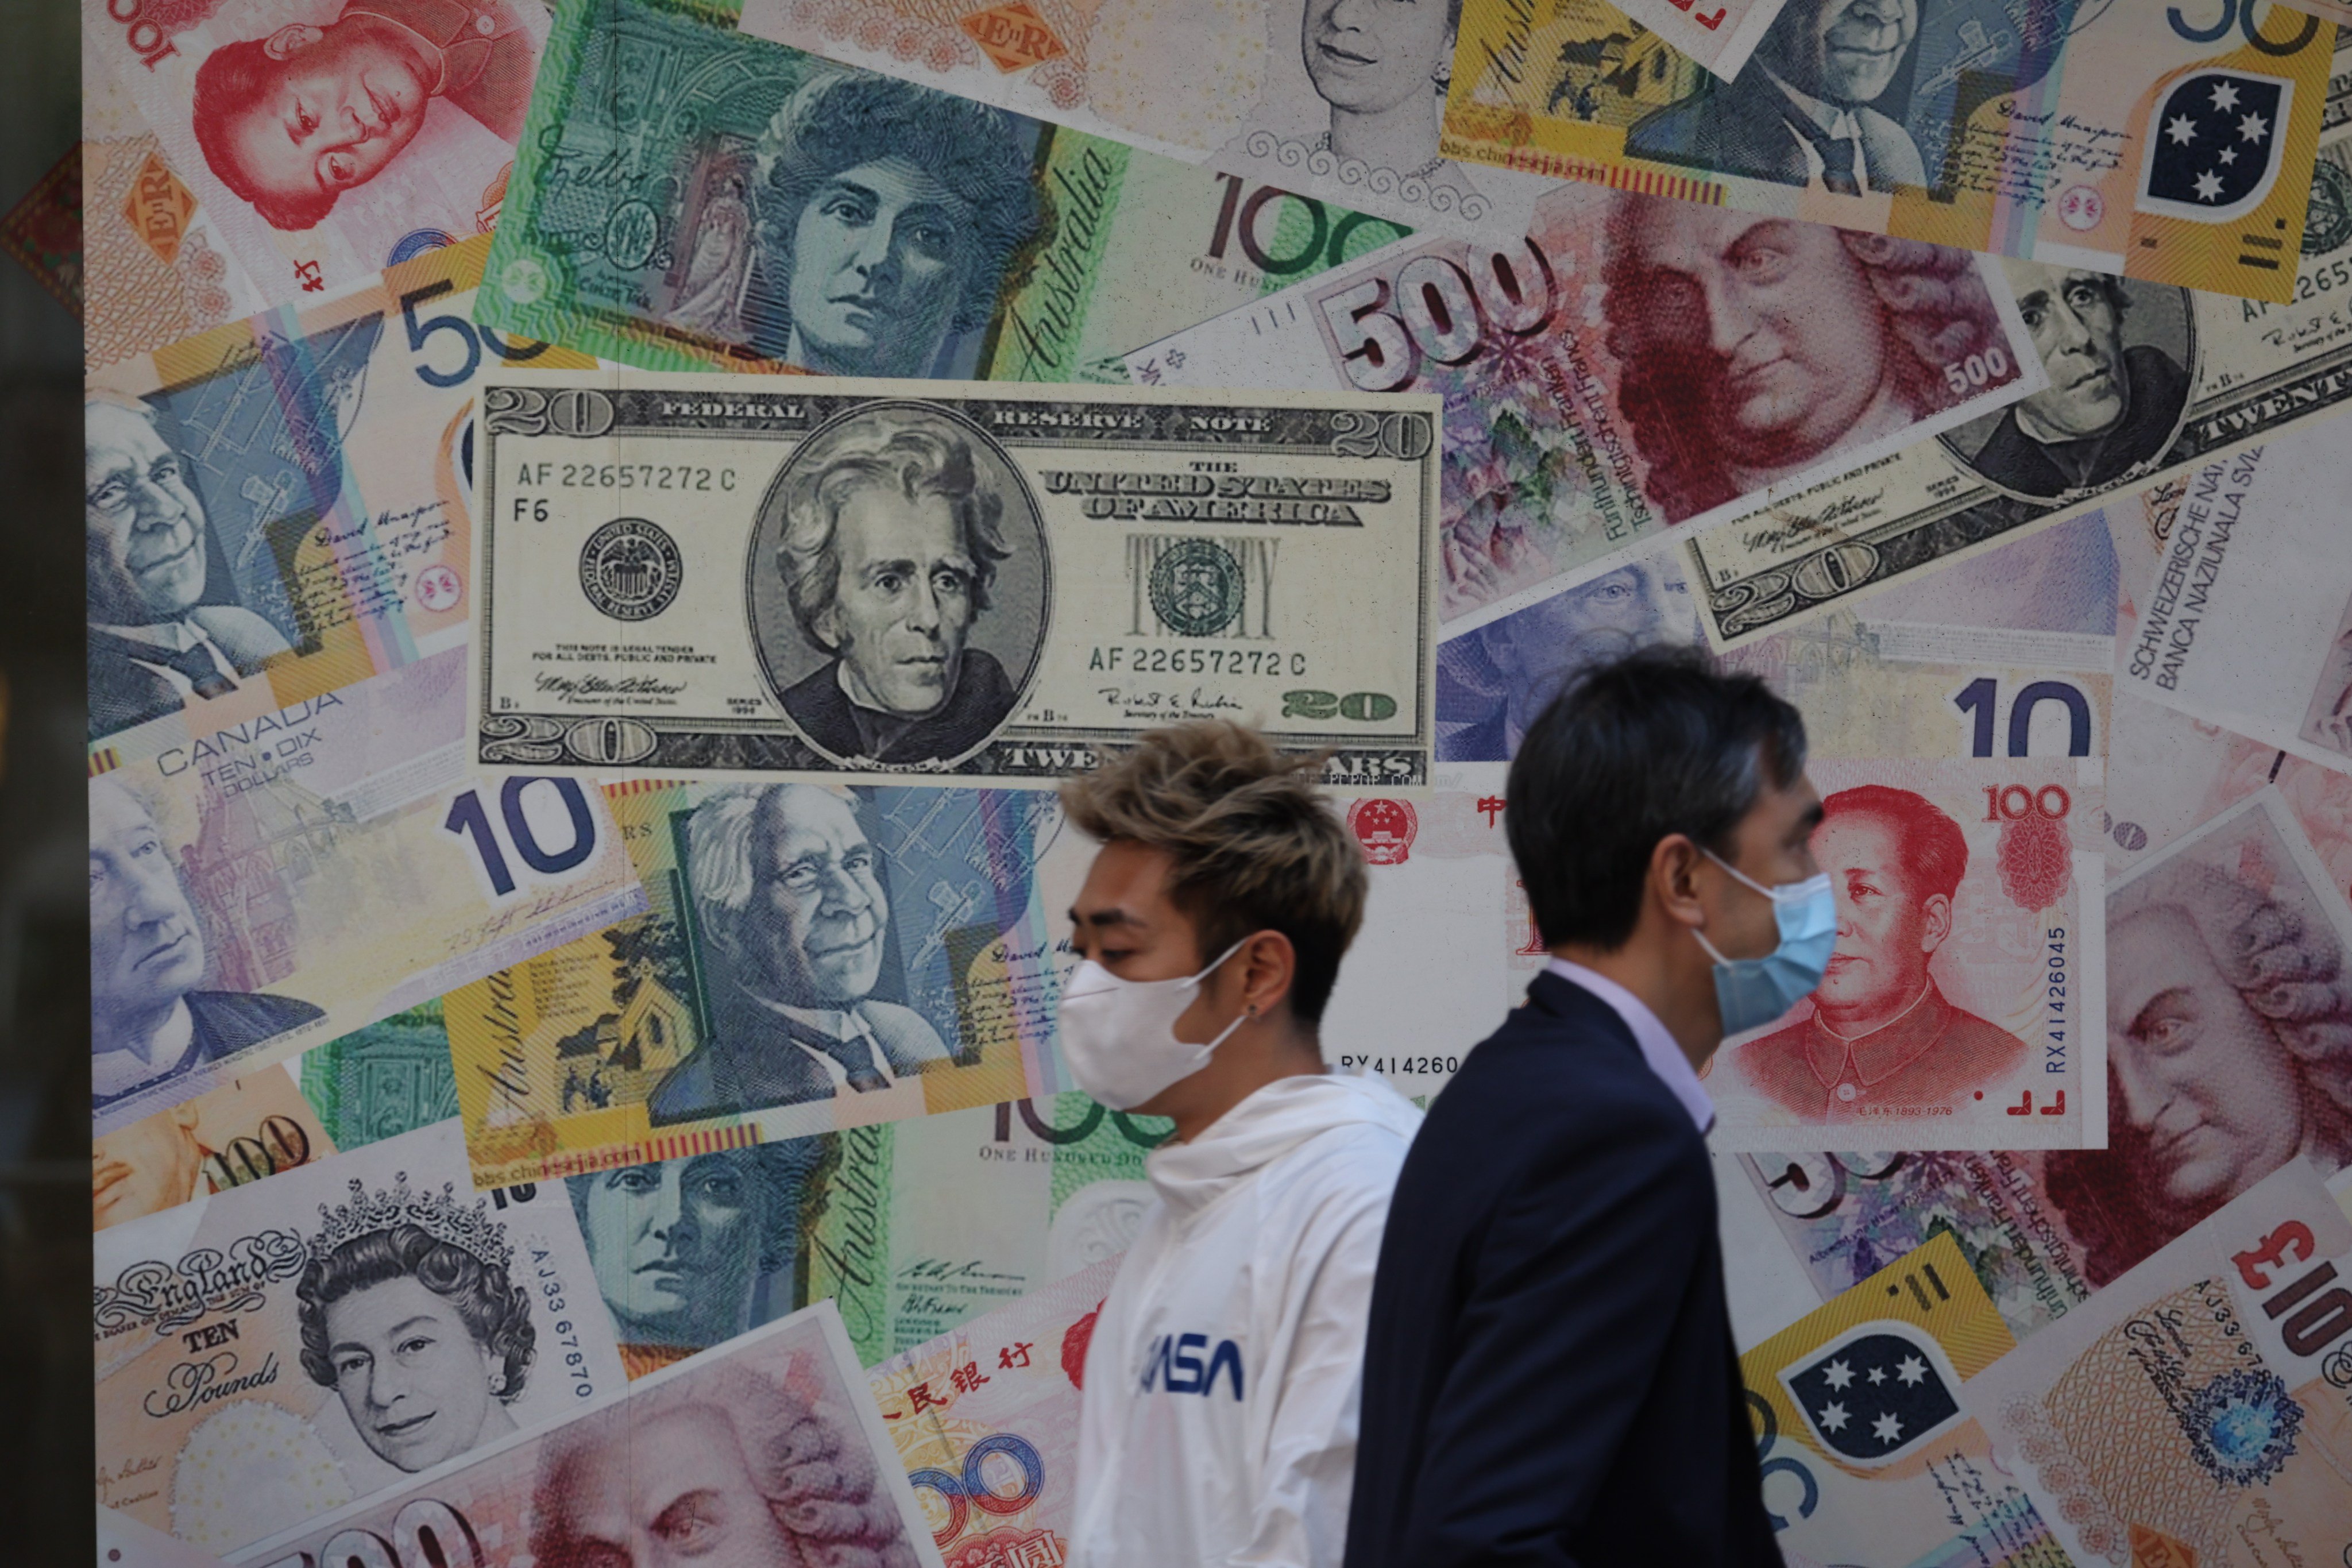 The USD, GDP, RMB and the other currencies on display outside a foreign exchange shop at Sheung Wan on 21 October 2022. Photo: Yik Yeung -man